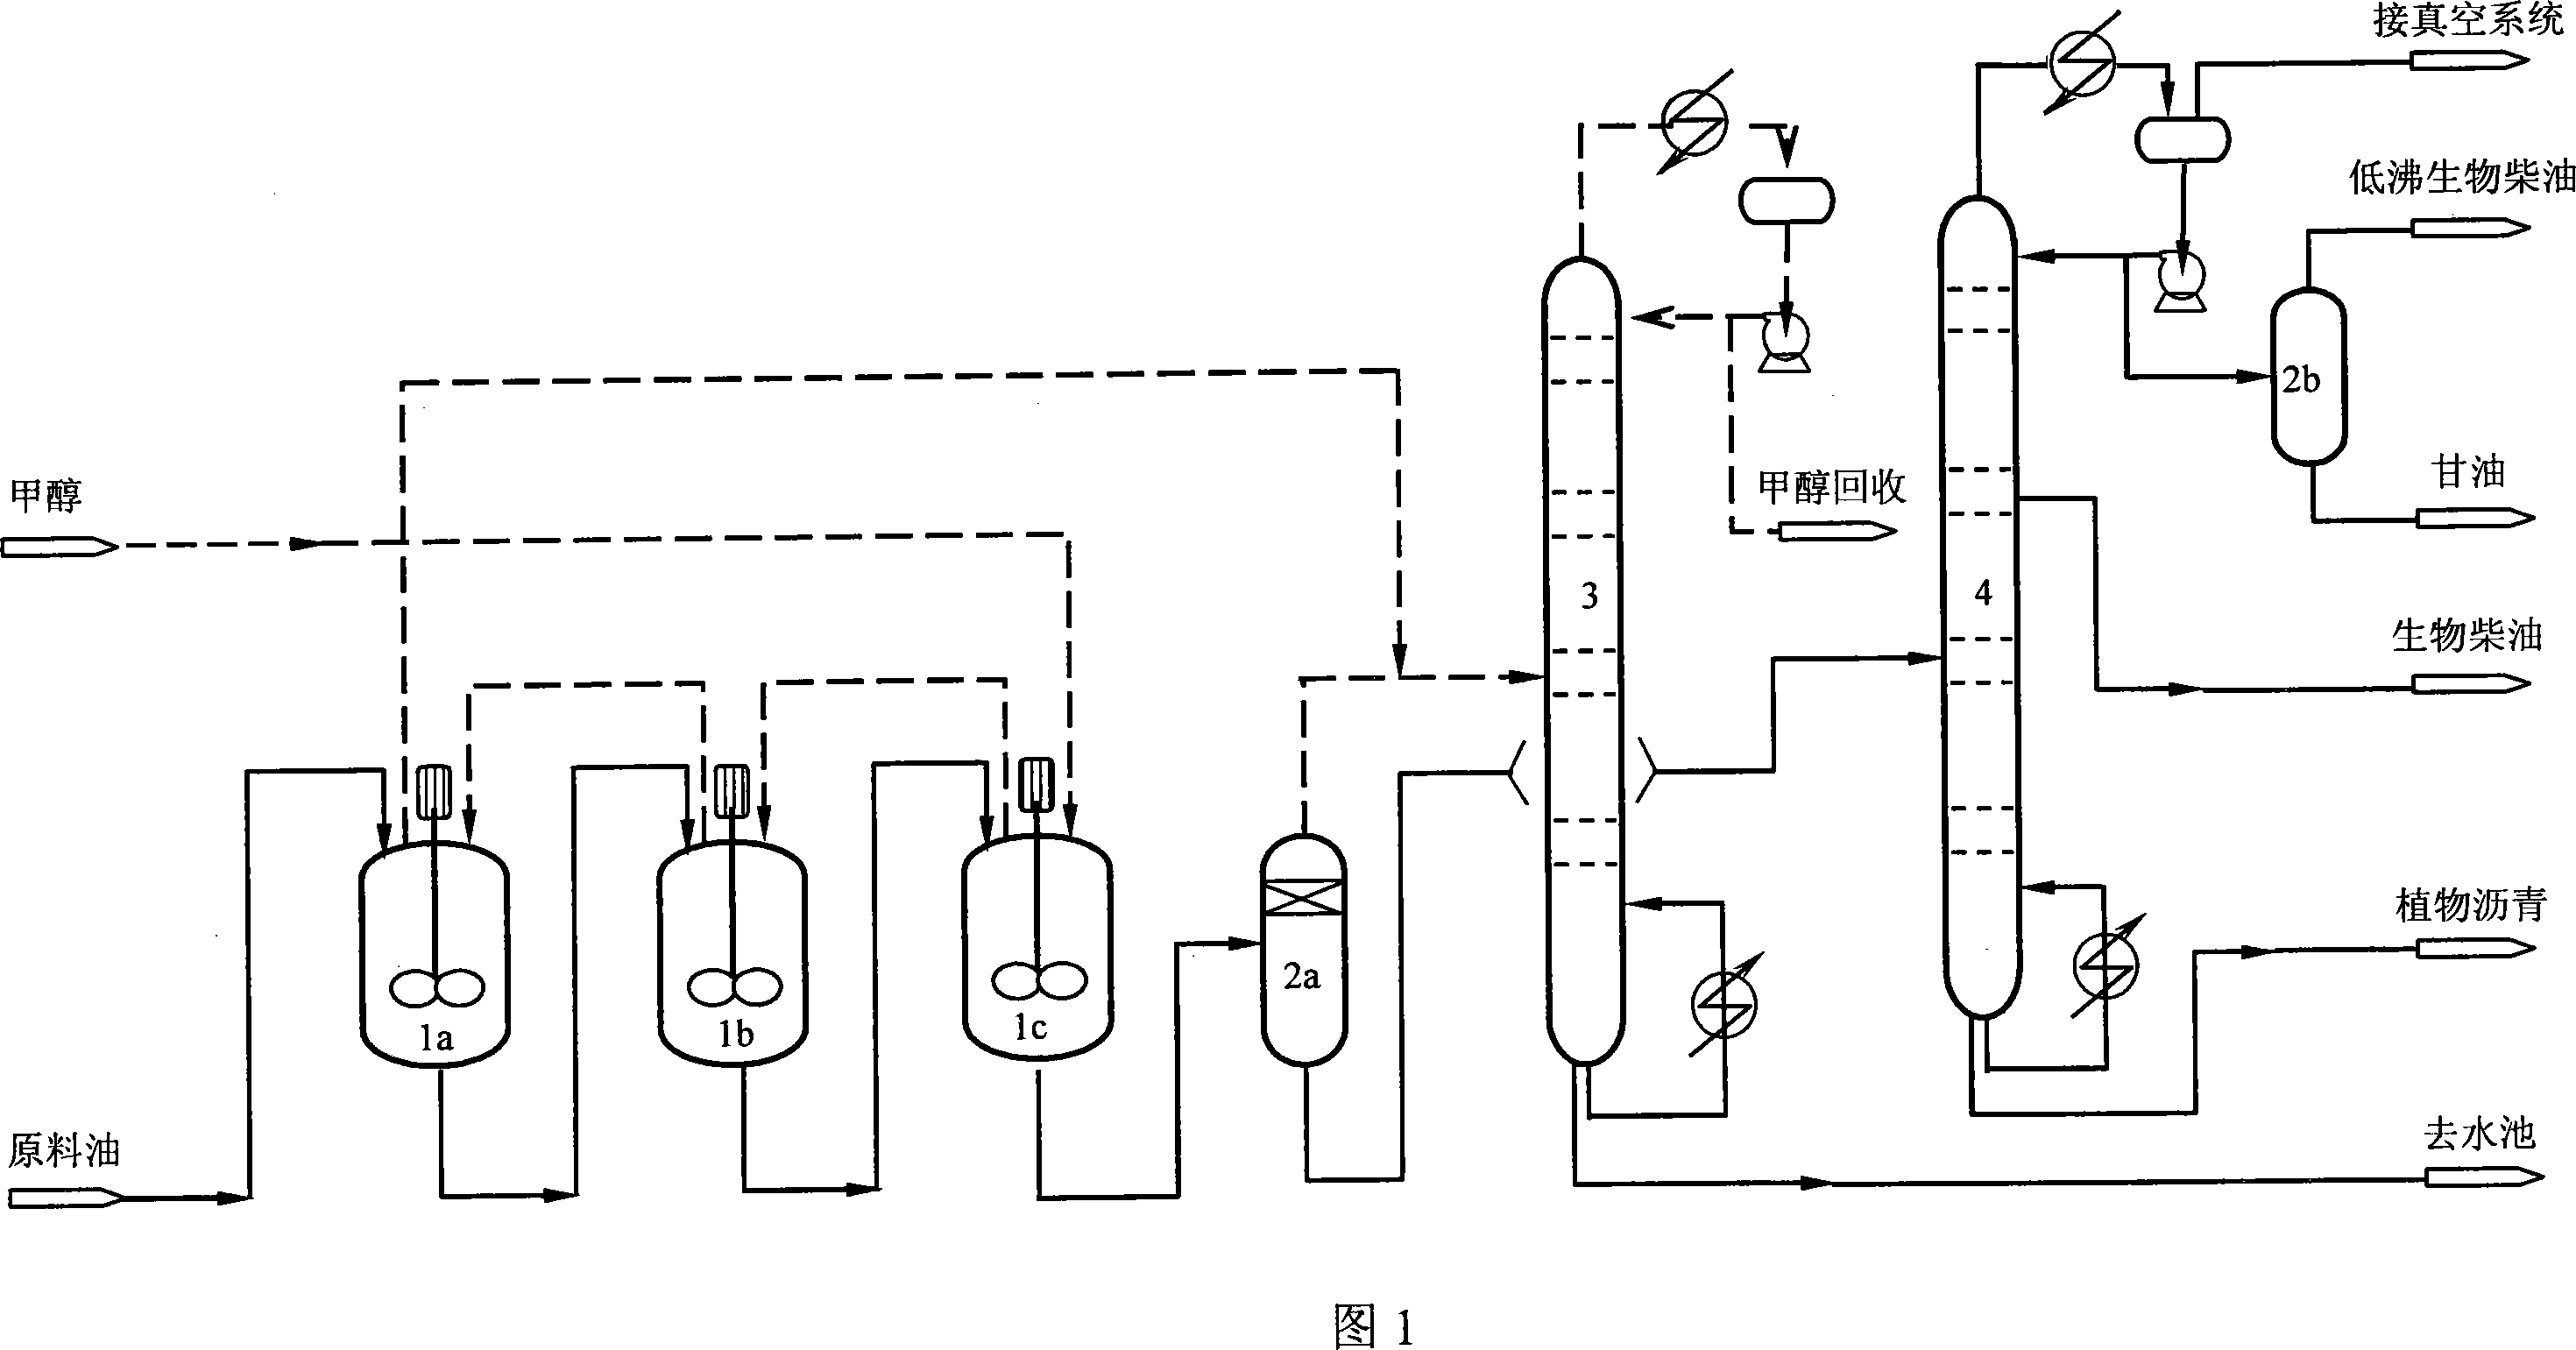 Solid catalysis process of preparing biodiesel oil continuously with high acid value material